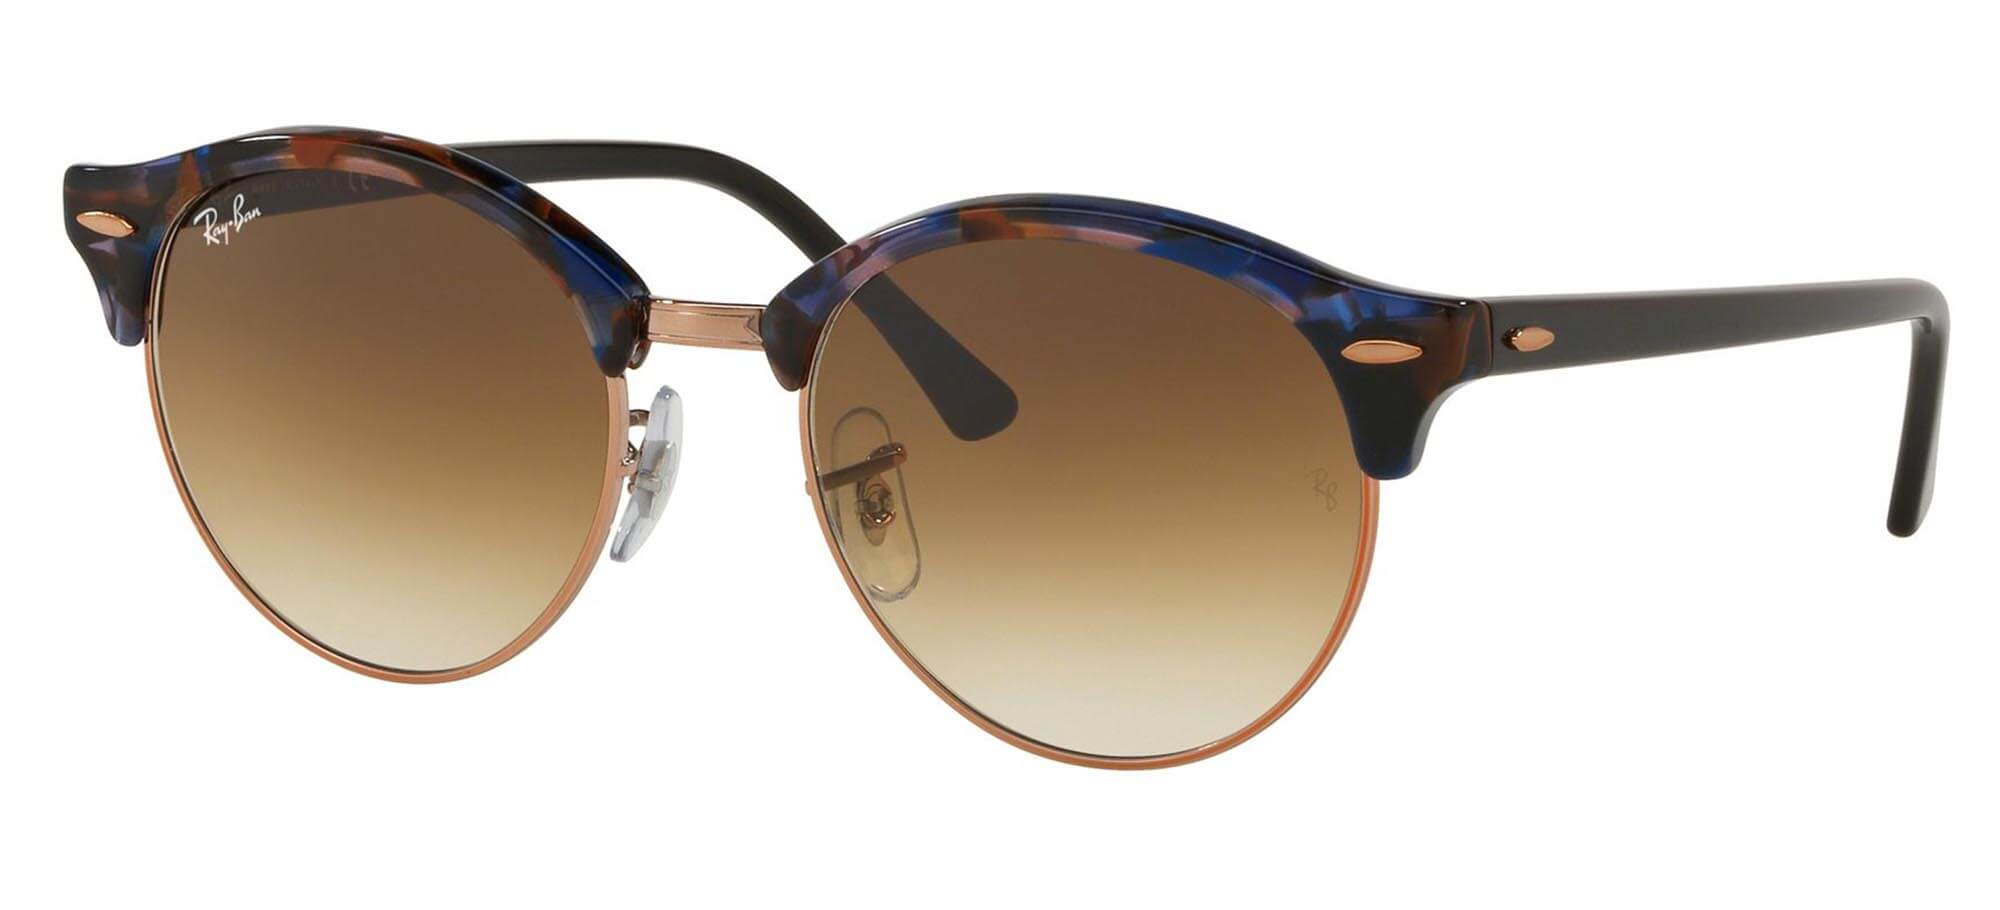 Ray-BanCLUBROUND RB 4246Blue Havana/brown Shaded (1256/51)